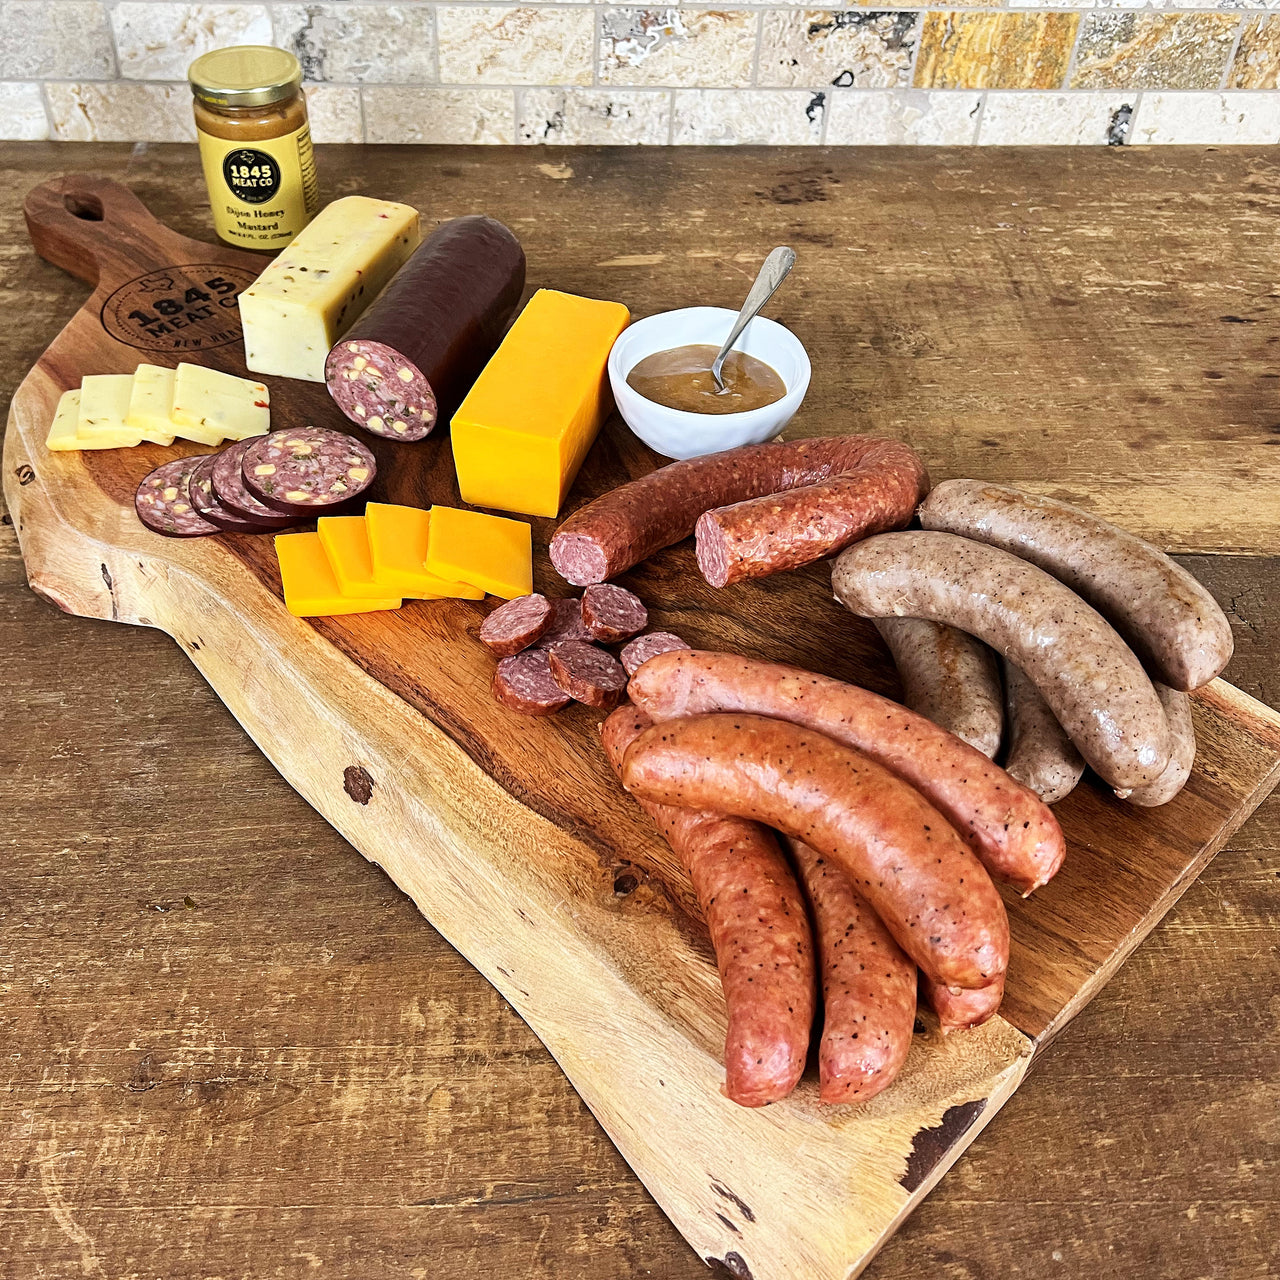 This assortment is a collection of some of our favorites.  Includes:  16 oz. of Pork & Beef Sausage 16 oz. of Bratwurst 12 oz. Cheddar Jalapeno Summer Sausage 8 oz. Dietert Family Pork & Beef Ring Sausage 8 oz. Smoked Cheddar Cheese 8 oz. Smoked Pepper Jack Cheese 8 oz. Jar of Honey Dijon Mustard ﻿Item #10E